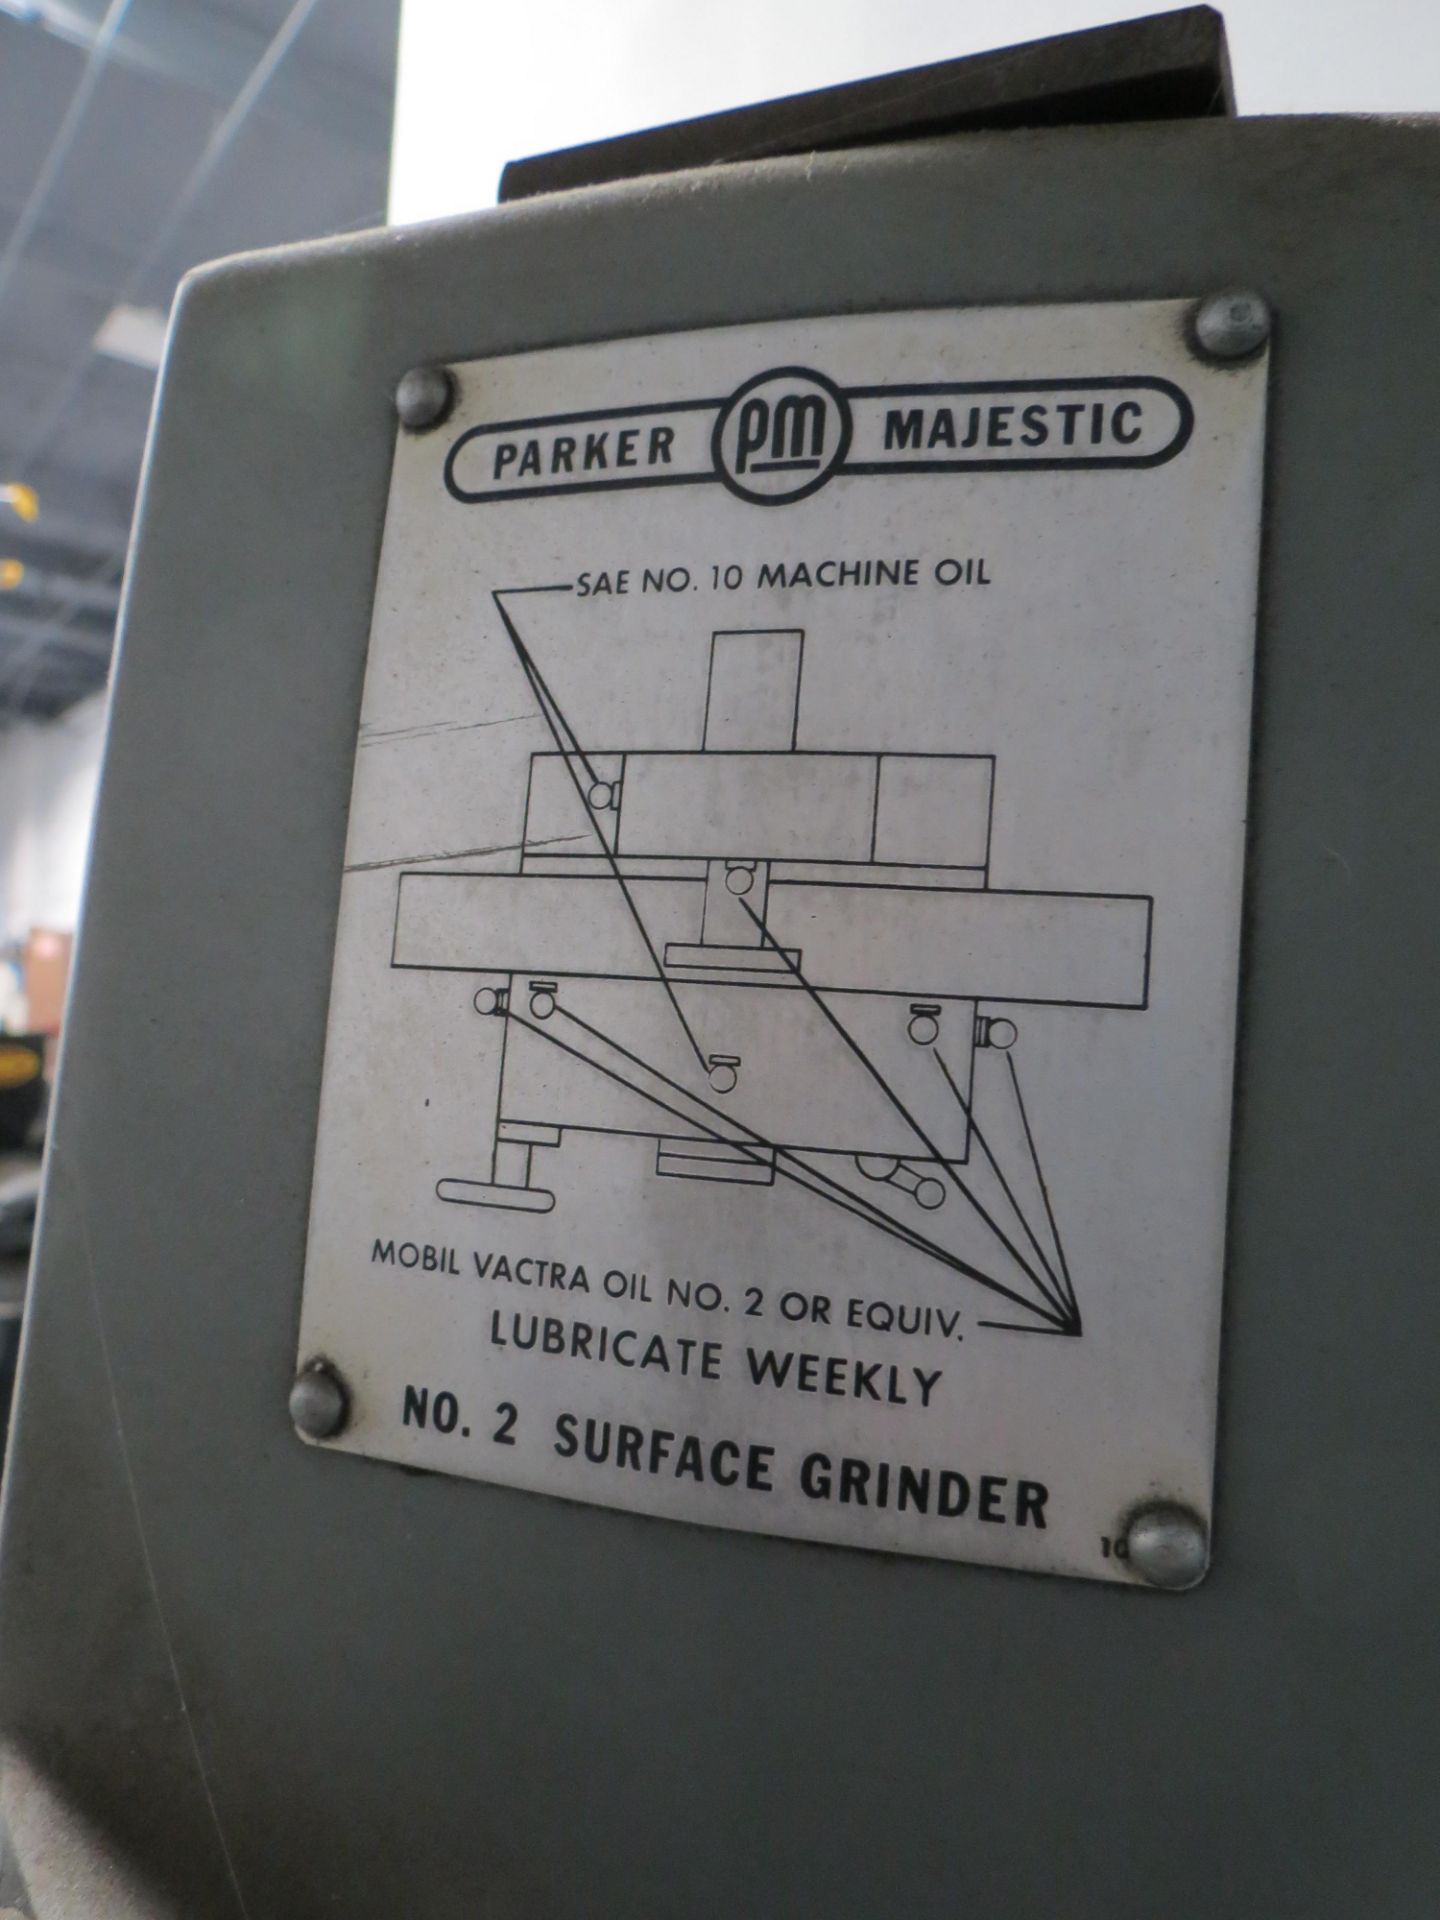 PARKER MAJESTIC SURFACE GRINDER WITH ELECTRO-MATIC CHUCK CONTROL - Image 7 of 8